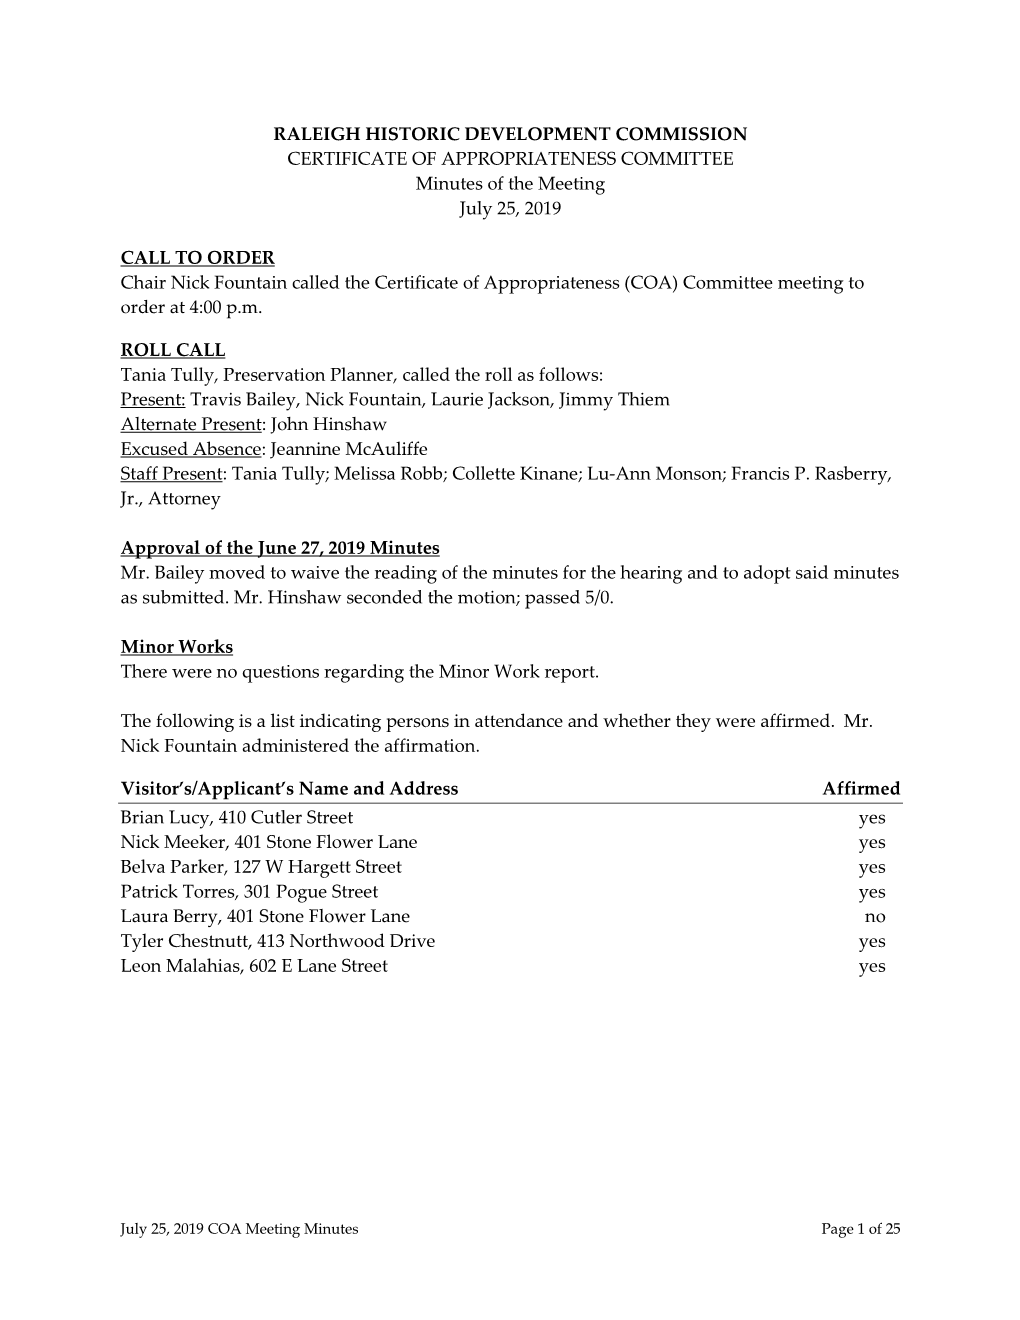 RALEIGH HISTORIC DEVELOPMENT COMMISSION CERTIFICATE of APPROPRIATENESS COMMITTEE Minutes of the Meeting July 25, 2019